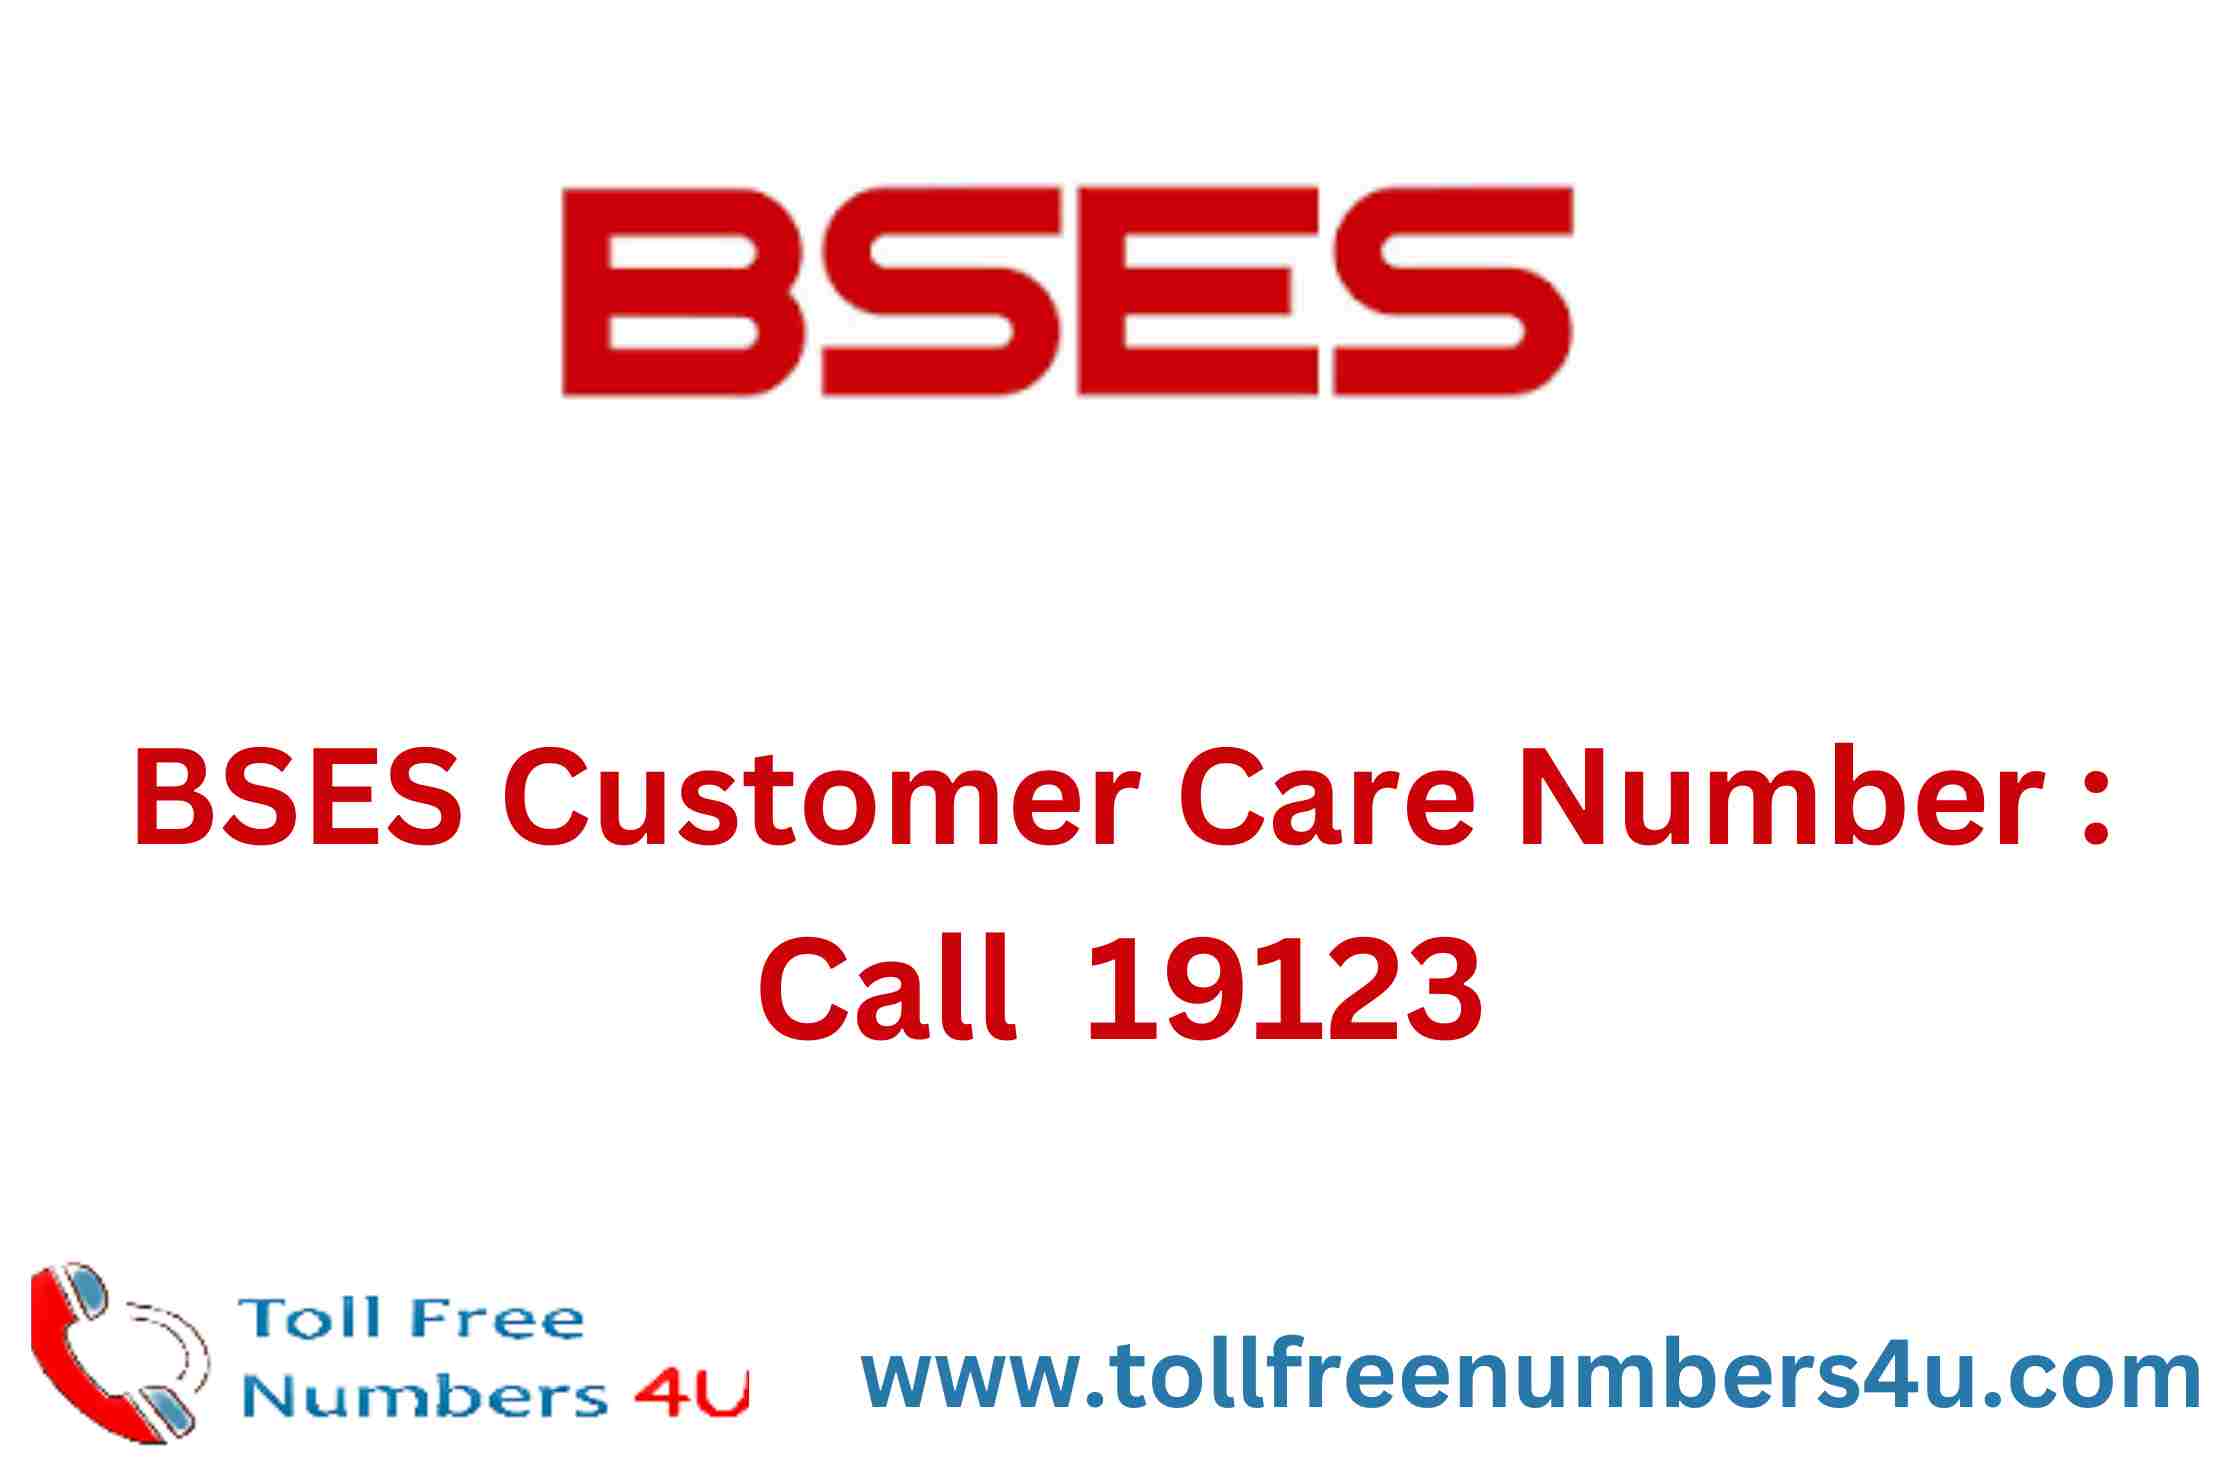 BSES Customer Care Number